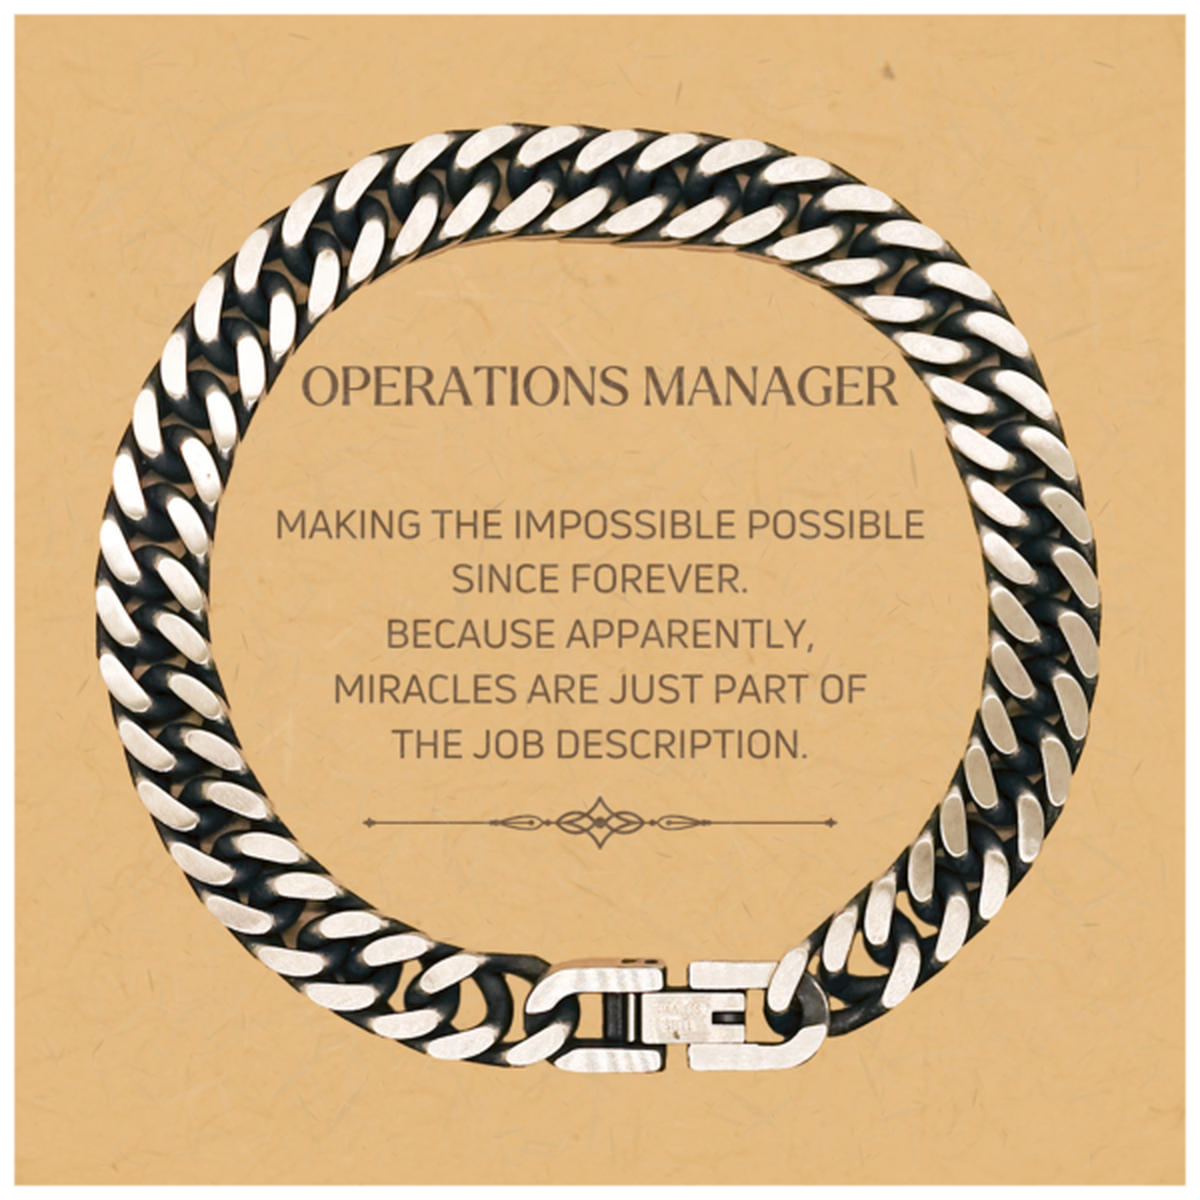 Funny Operations Manager Gifts, Miracles are just part of the job description, Inspirational Birthday Christmas Cuban Link Chain Bracelet For Operations Manager, Men, Women, Coworkers, Friends, Boss